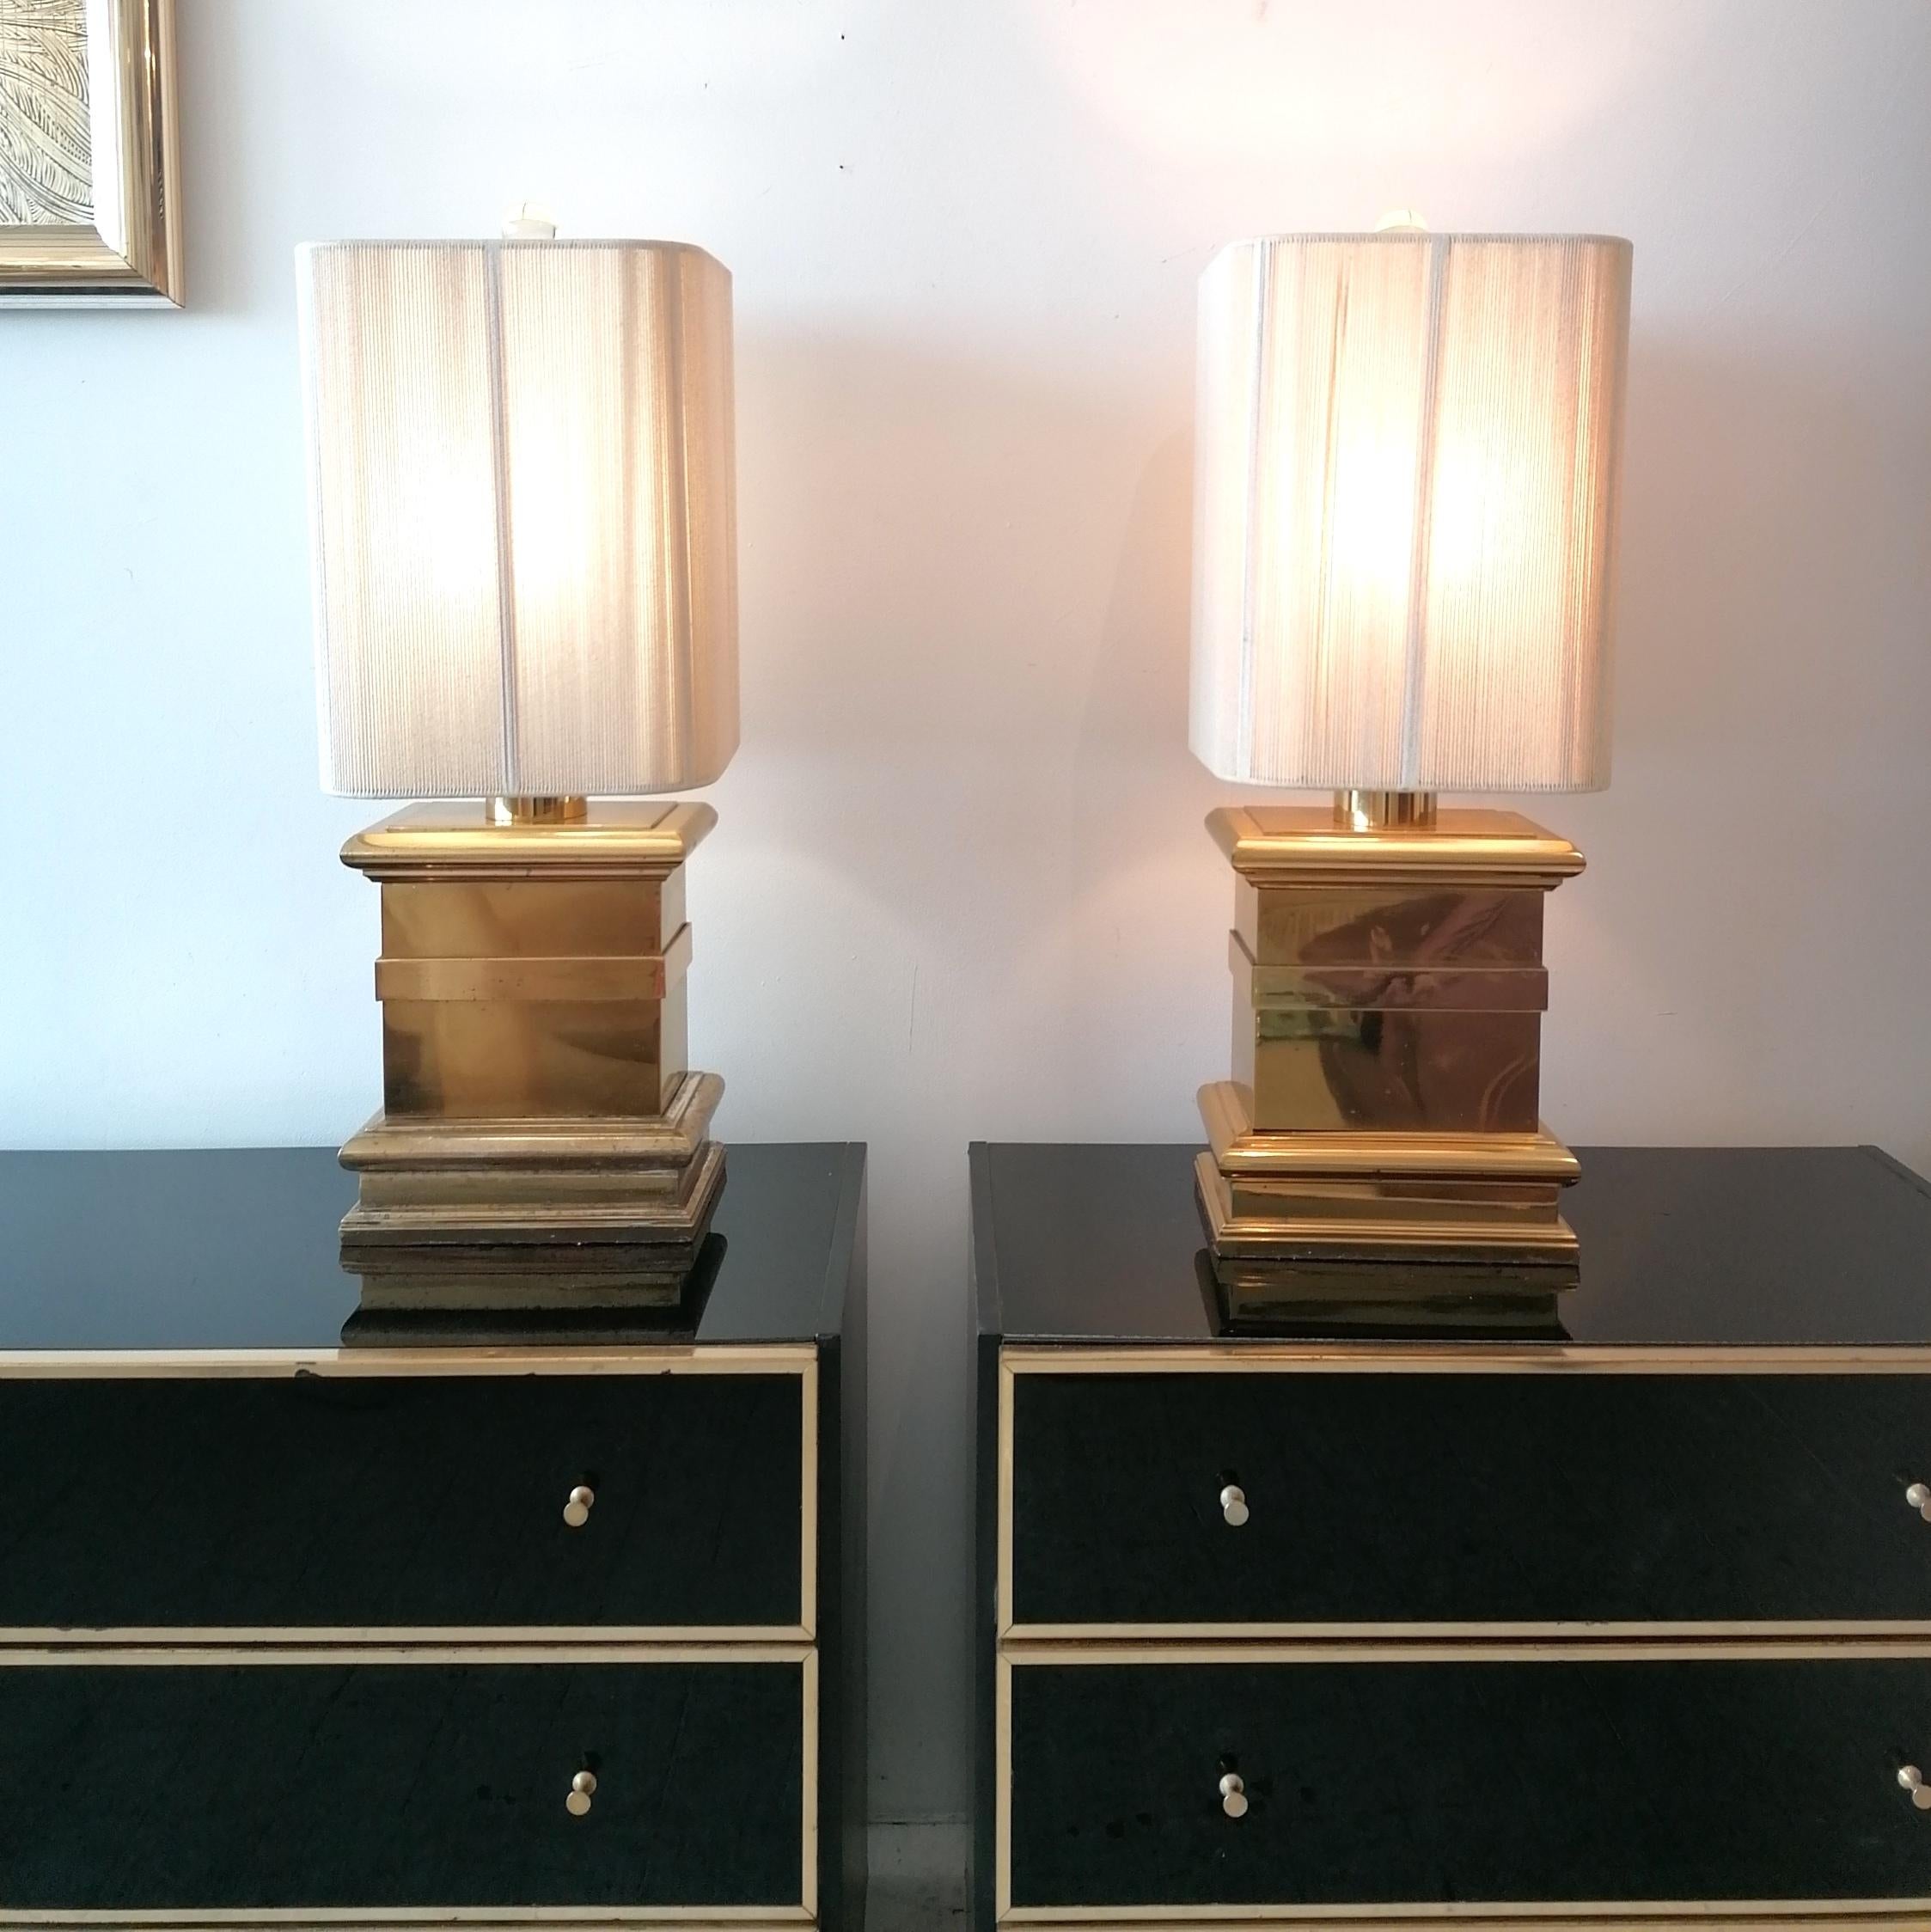 Pair of monumental Hollywood Regency James Mont style brass lamps, with original string shades & lucite finial, USA 1970s. Newly rewired with braided cord.

Dimensions: height to top of shade finial 75cm, height to bulb holder 47cm, diameter of